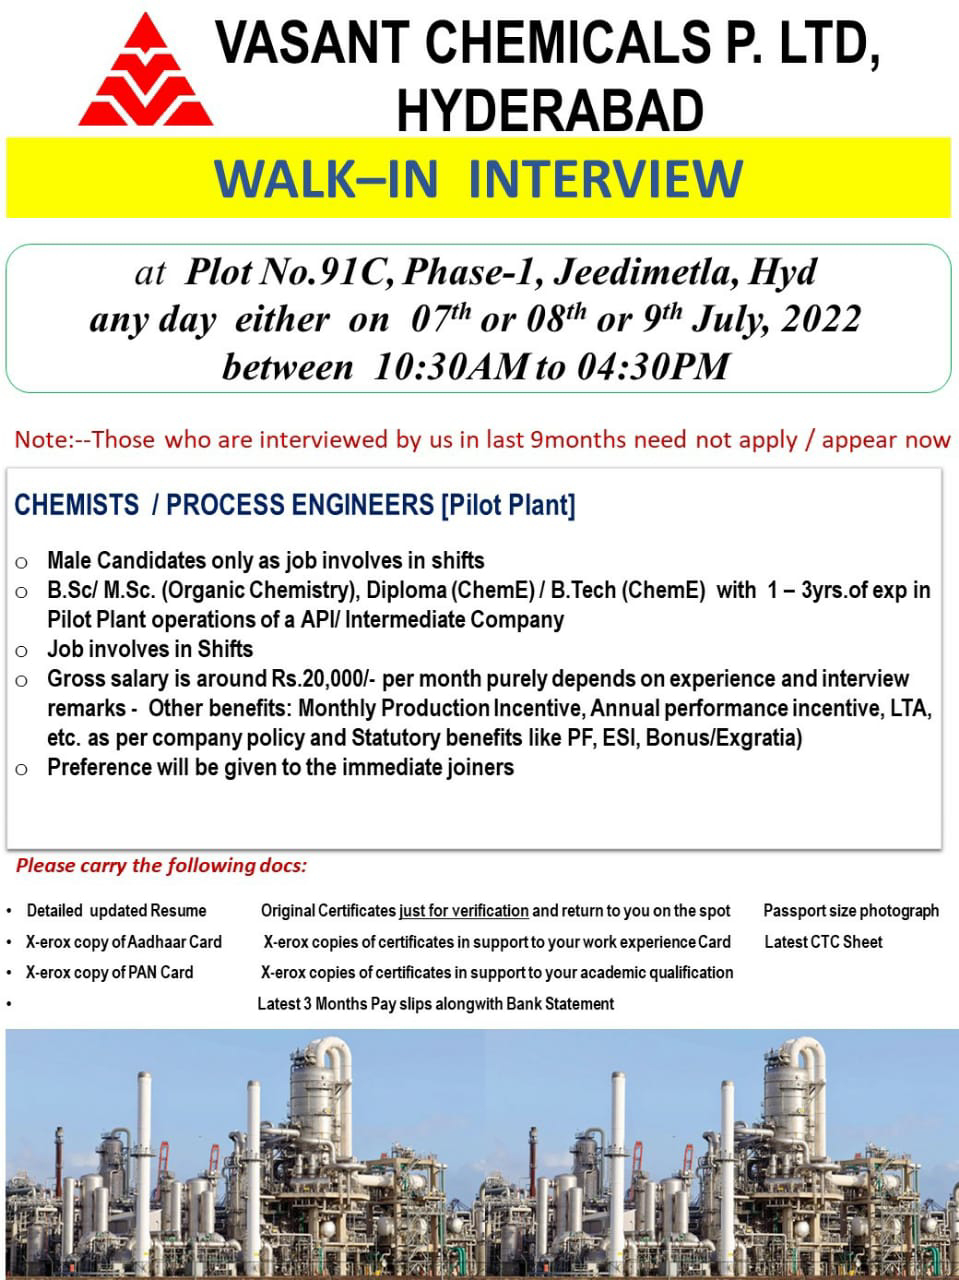 Job Available's for Vasant Chemicals Pvt Ltd Walk-In Interview for BSc/ MSc Organic Chemistry/ Diploma/ B Tech/ Chemical Engineer